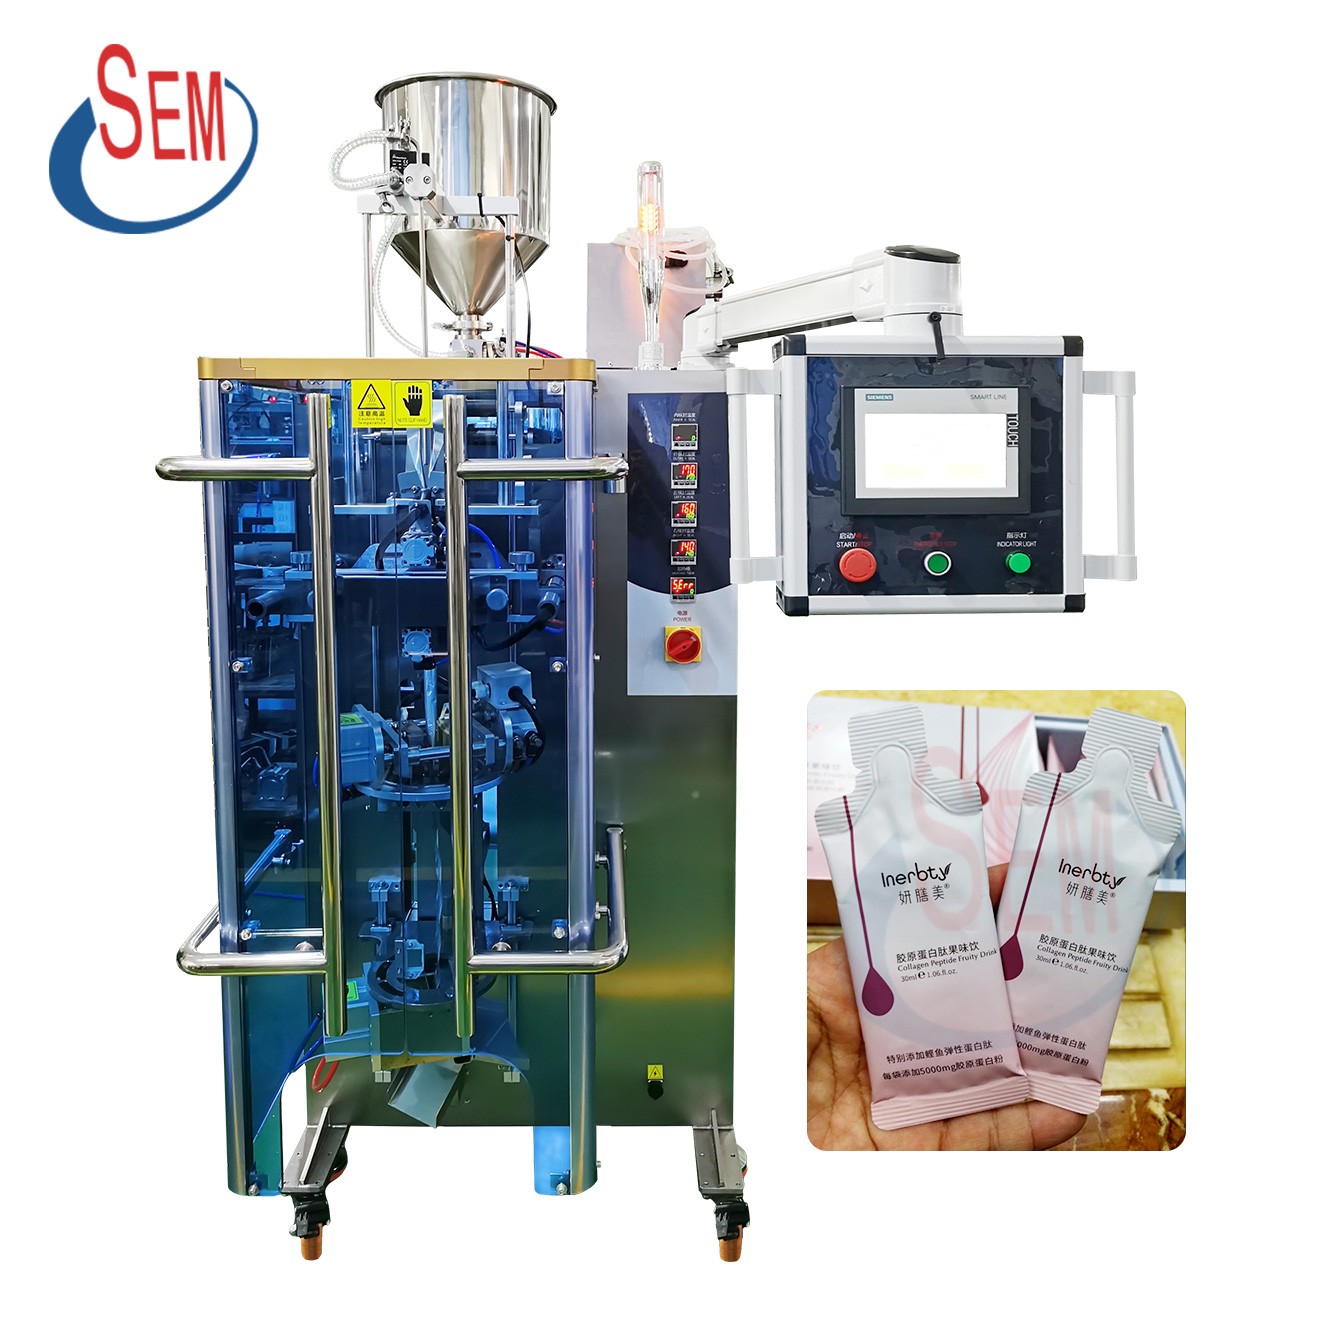 The equipment is a Syringe semi-automatic filling machine